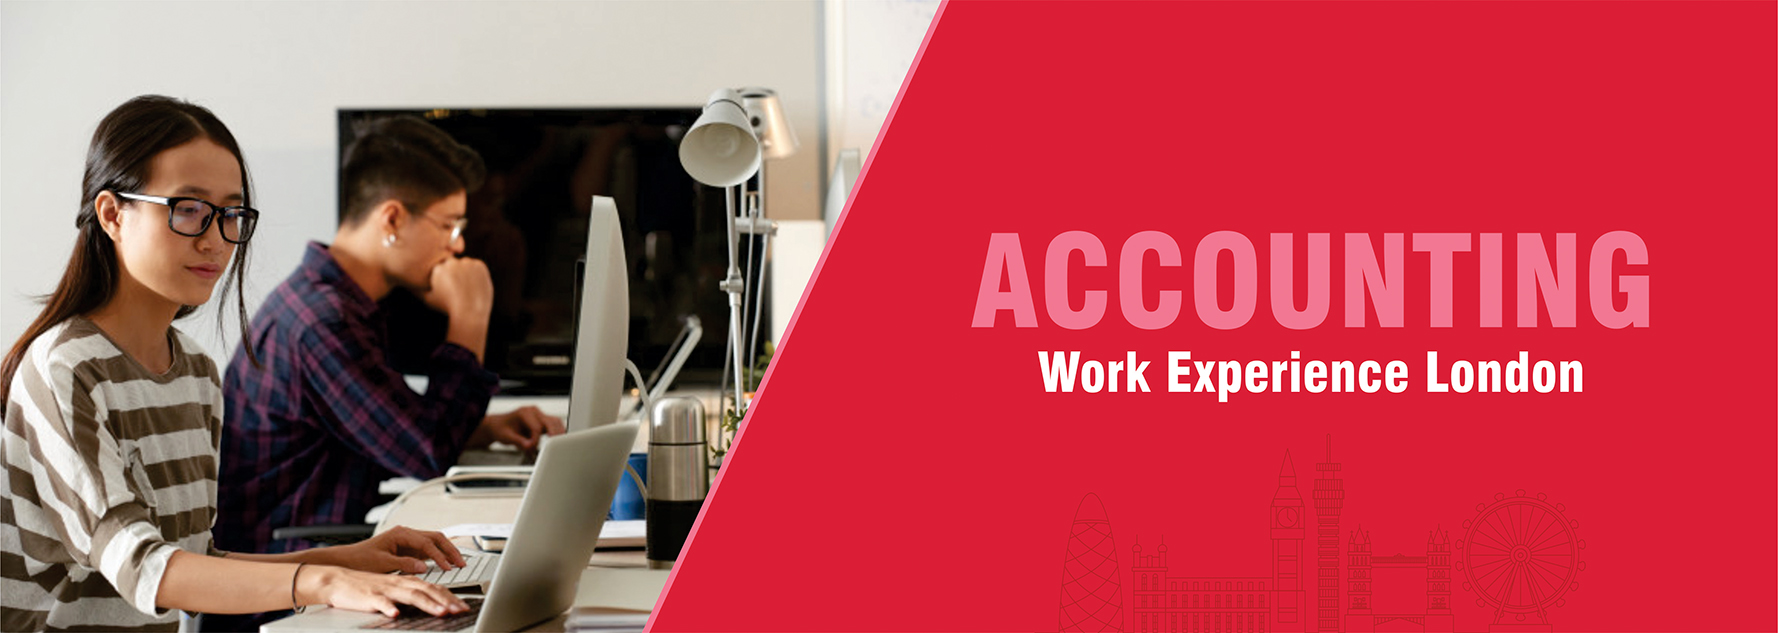 accounting-work-experience-london